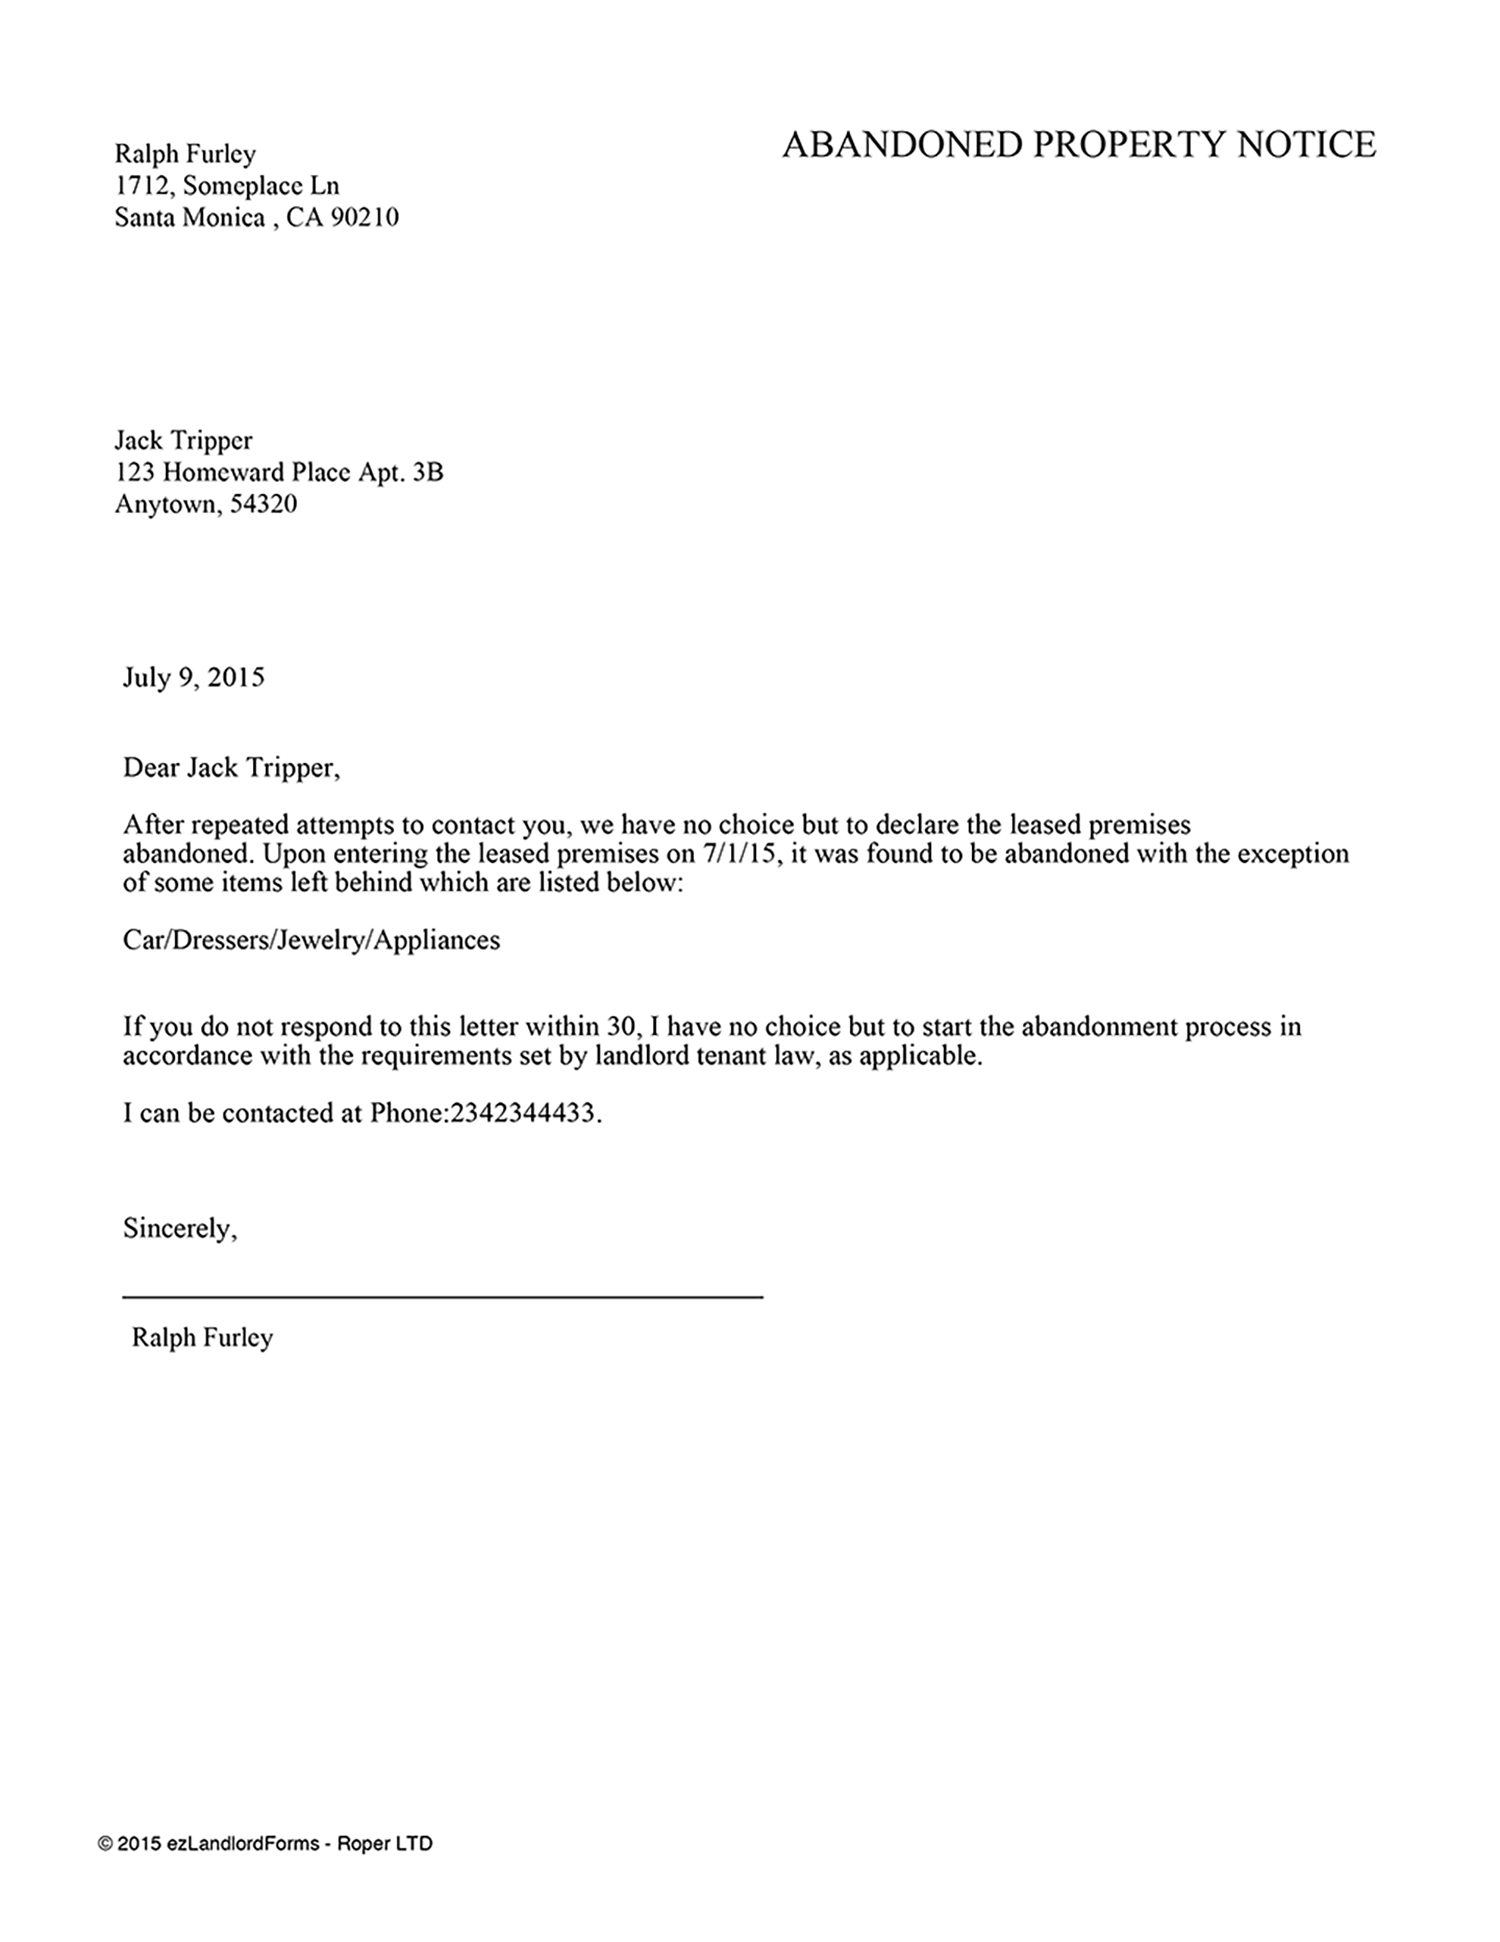 Sample Letter To Notify Tenant Of Sale Of Property from www.ezlandlordforms.com